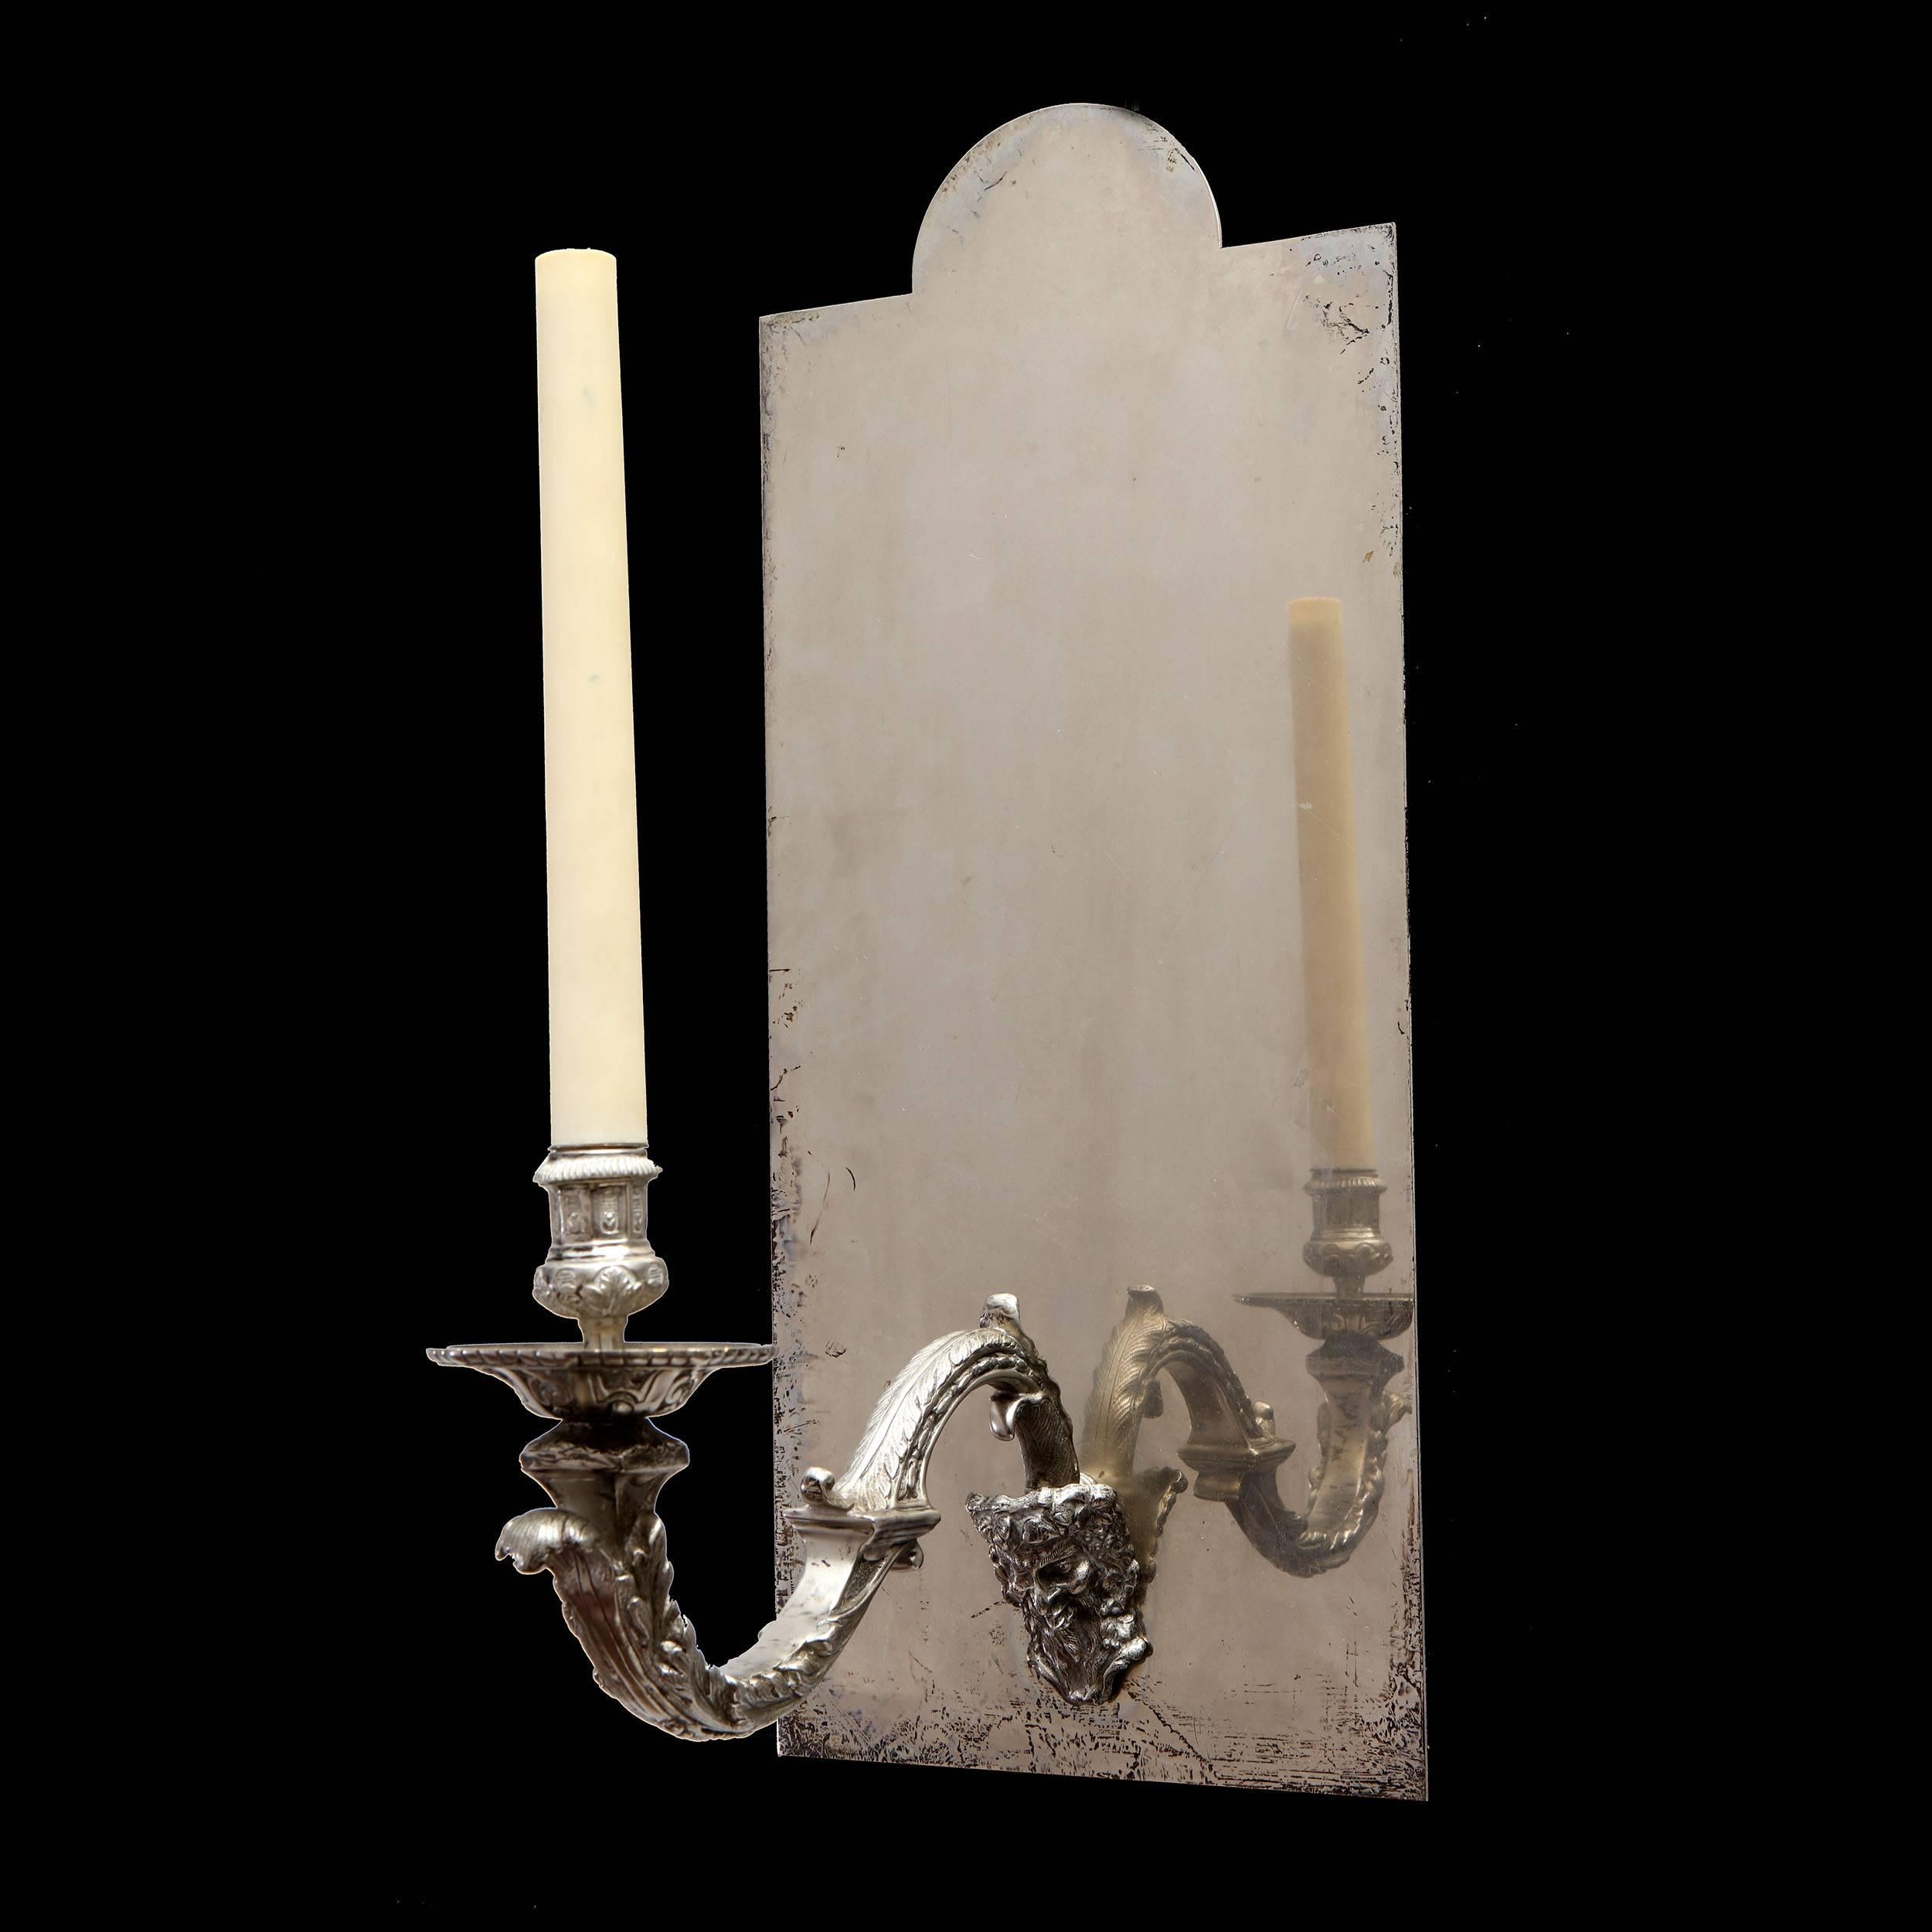 A fine pair of silver sconces, the arms modelled with a Satyr mask mounted on mirrored back plates.